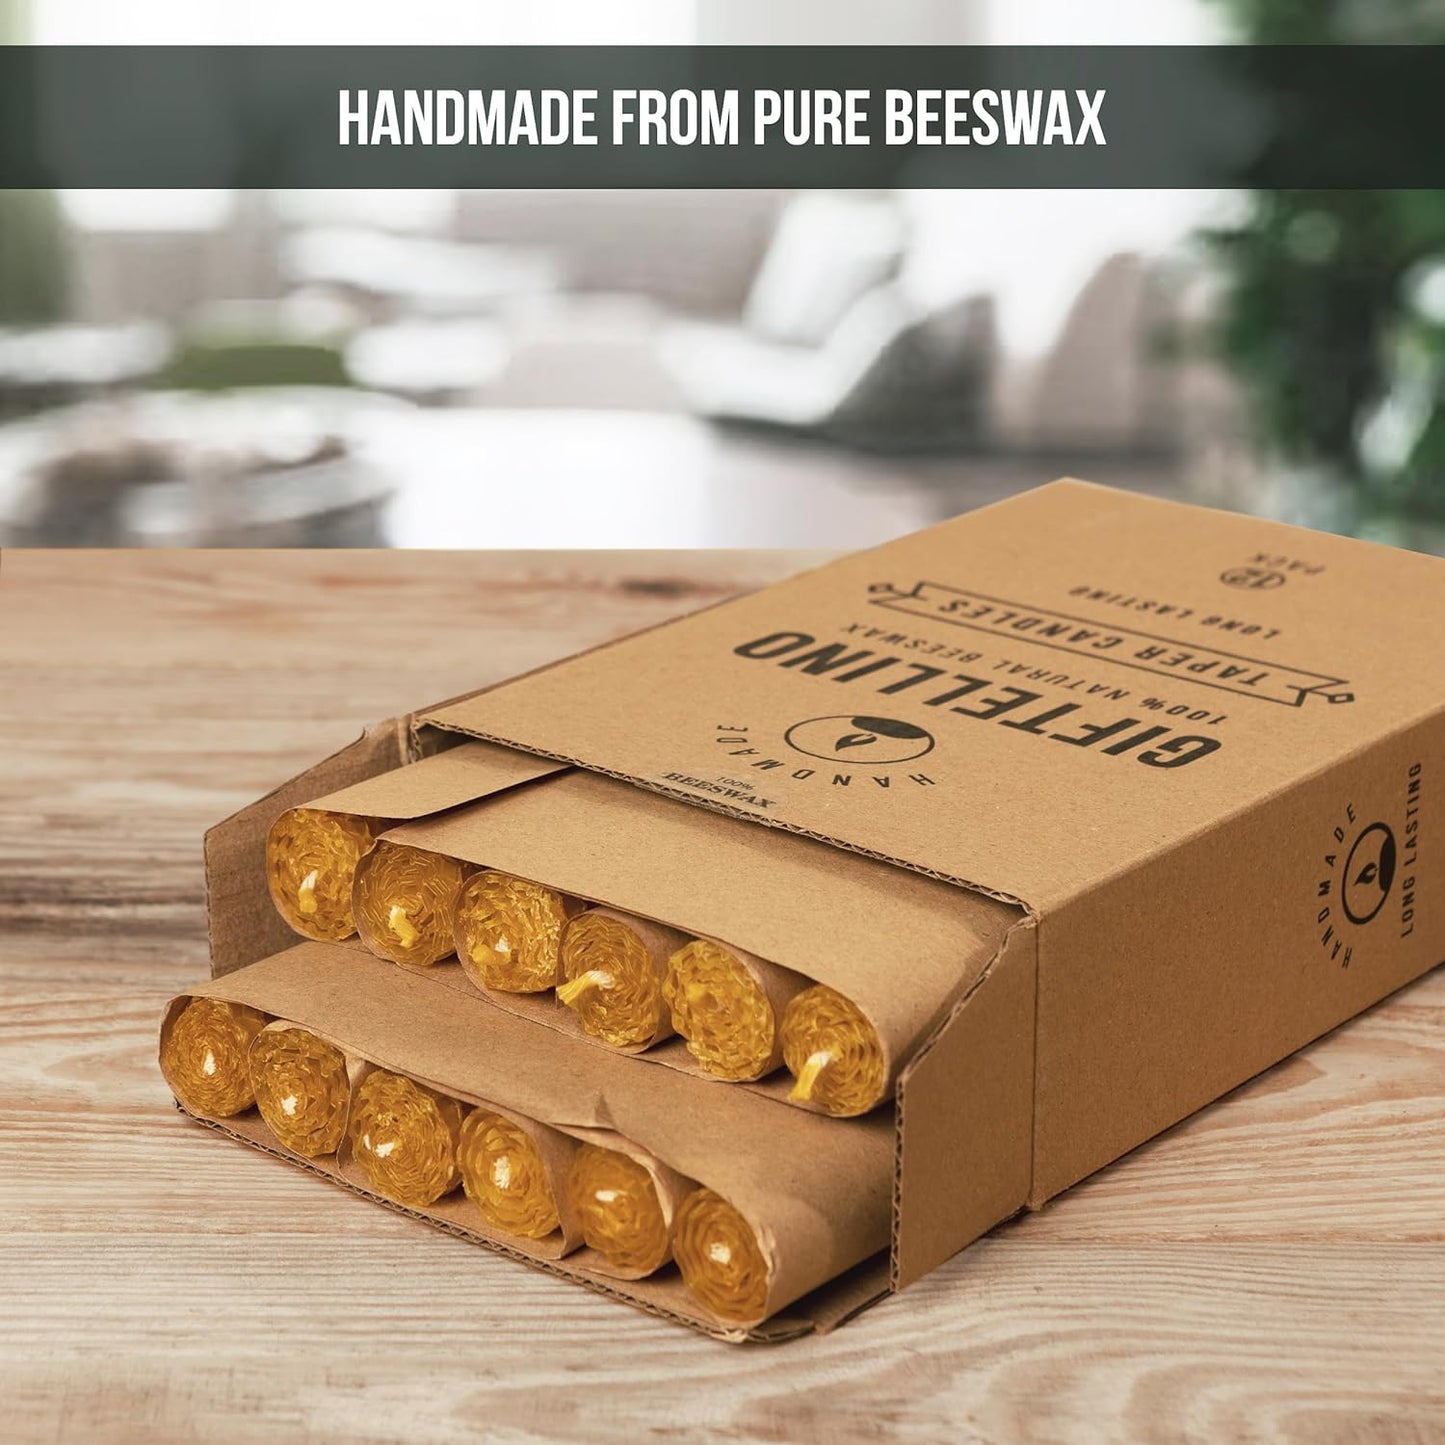 Set of 12 Pure Beeswax Honeycomb Candles - 5 Hour Lasting- Scentless Hand Rolled Beeswax Taper Candles - Cotton Wick Dripless Candles - Candle Lovers Gift